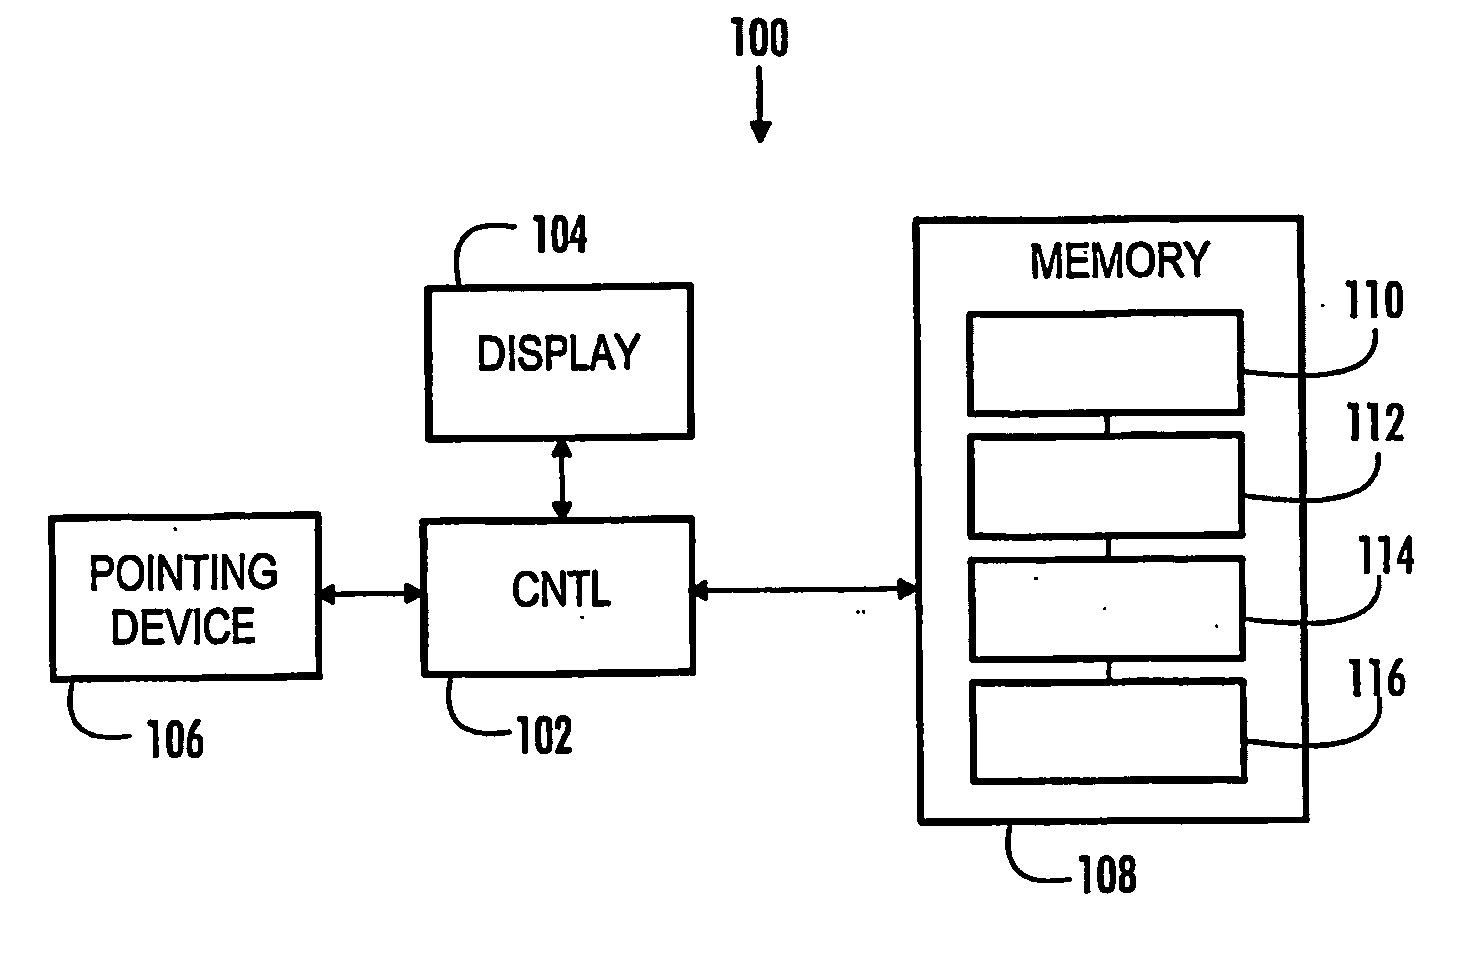 Method and system for navigating in real time in three-dimensional medical image model